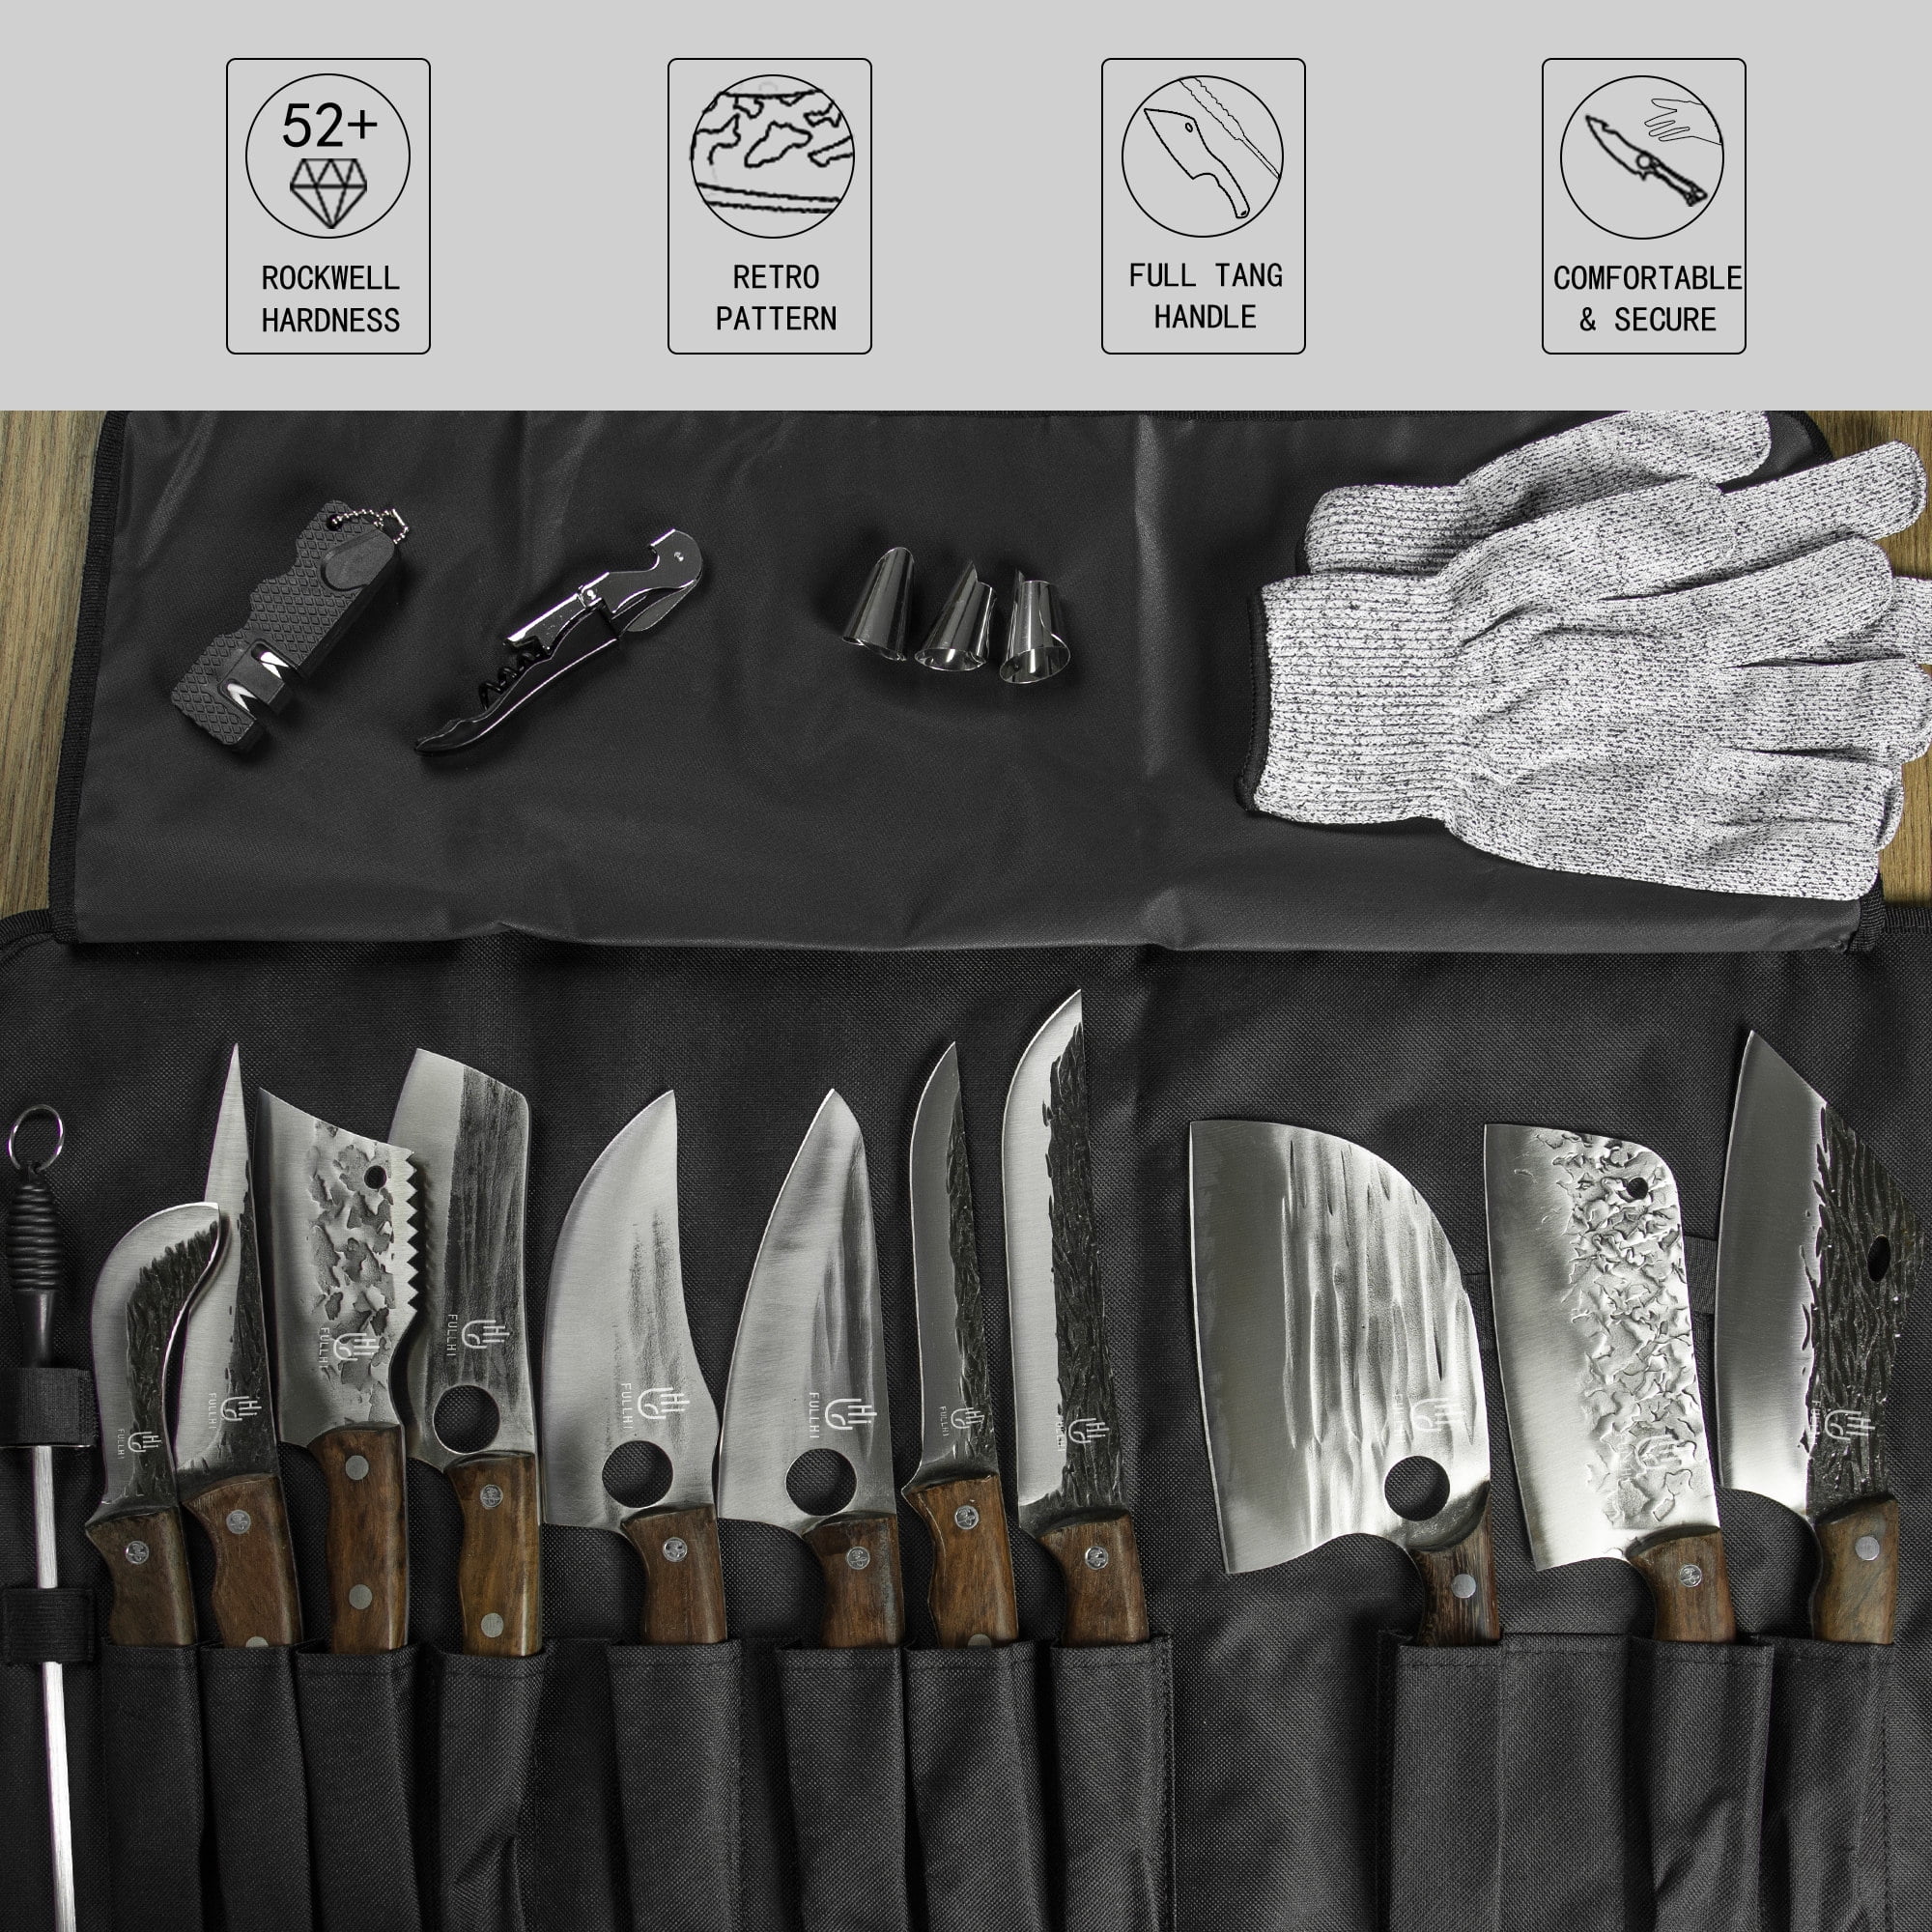 FULLHI Portable 14pcs Butcher Knife Set Wood Handle 8pcs Stainless Steel  Knives with Roll Bag Hand Forged Chef Knife Boning Knife High Carbon Steel  Viking Knife set For Kitchen, Camping, BBQ